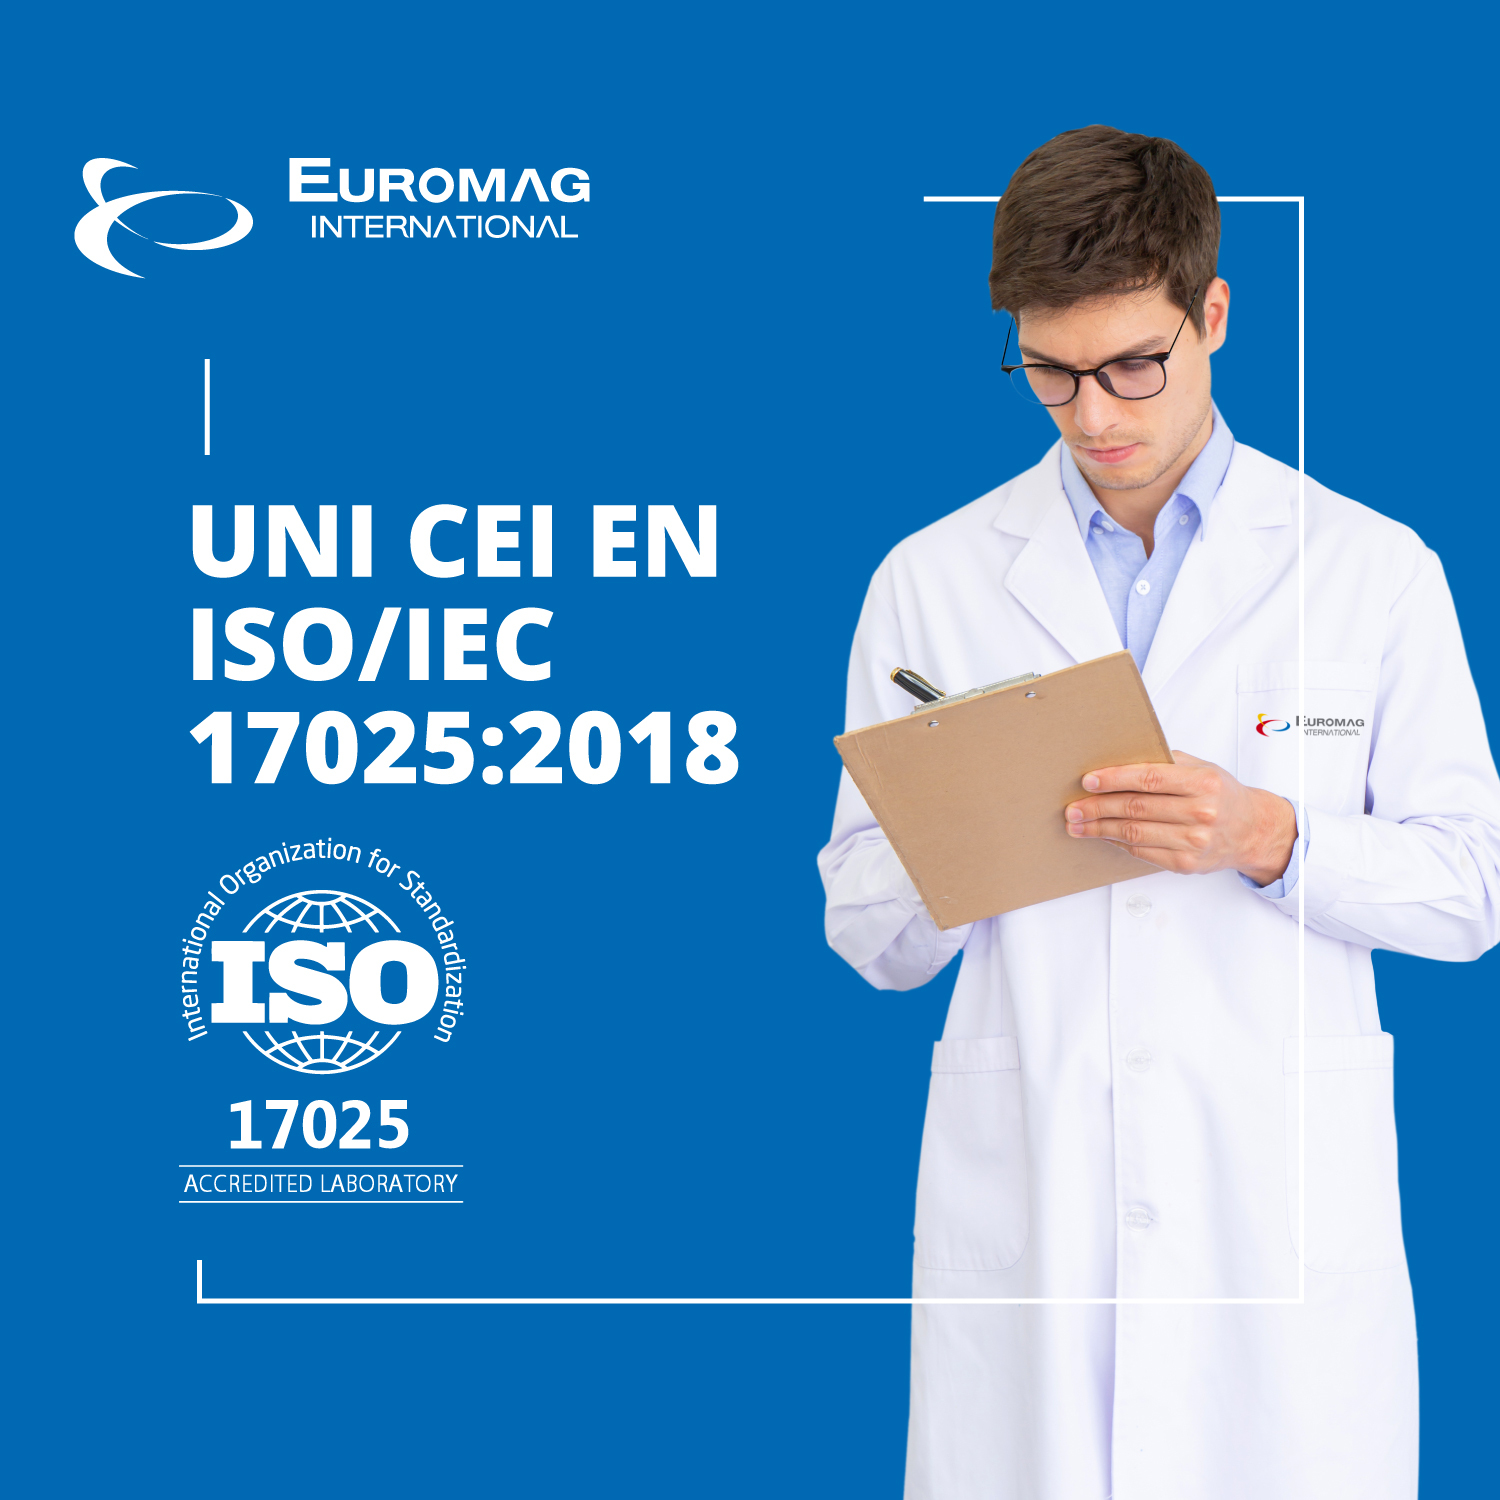 Euromag Complies With The Requirements Of The Uni Cei En Iso Iec 17025